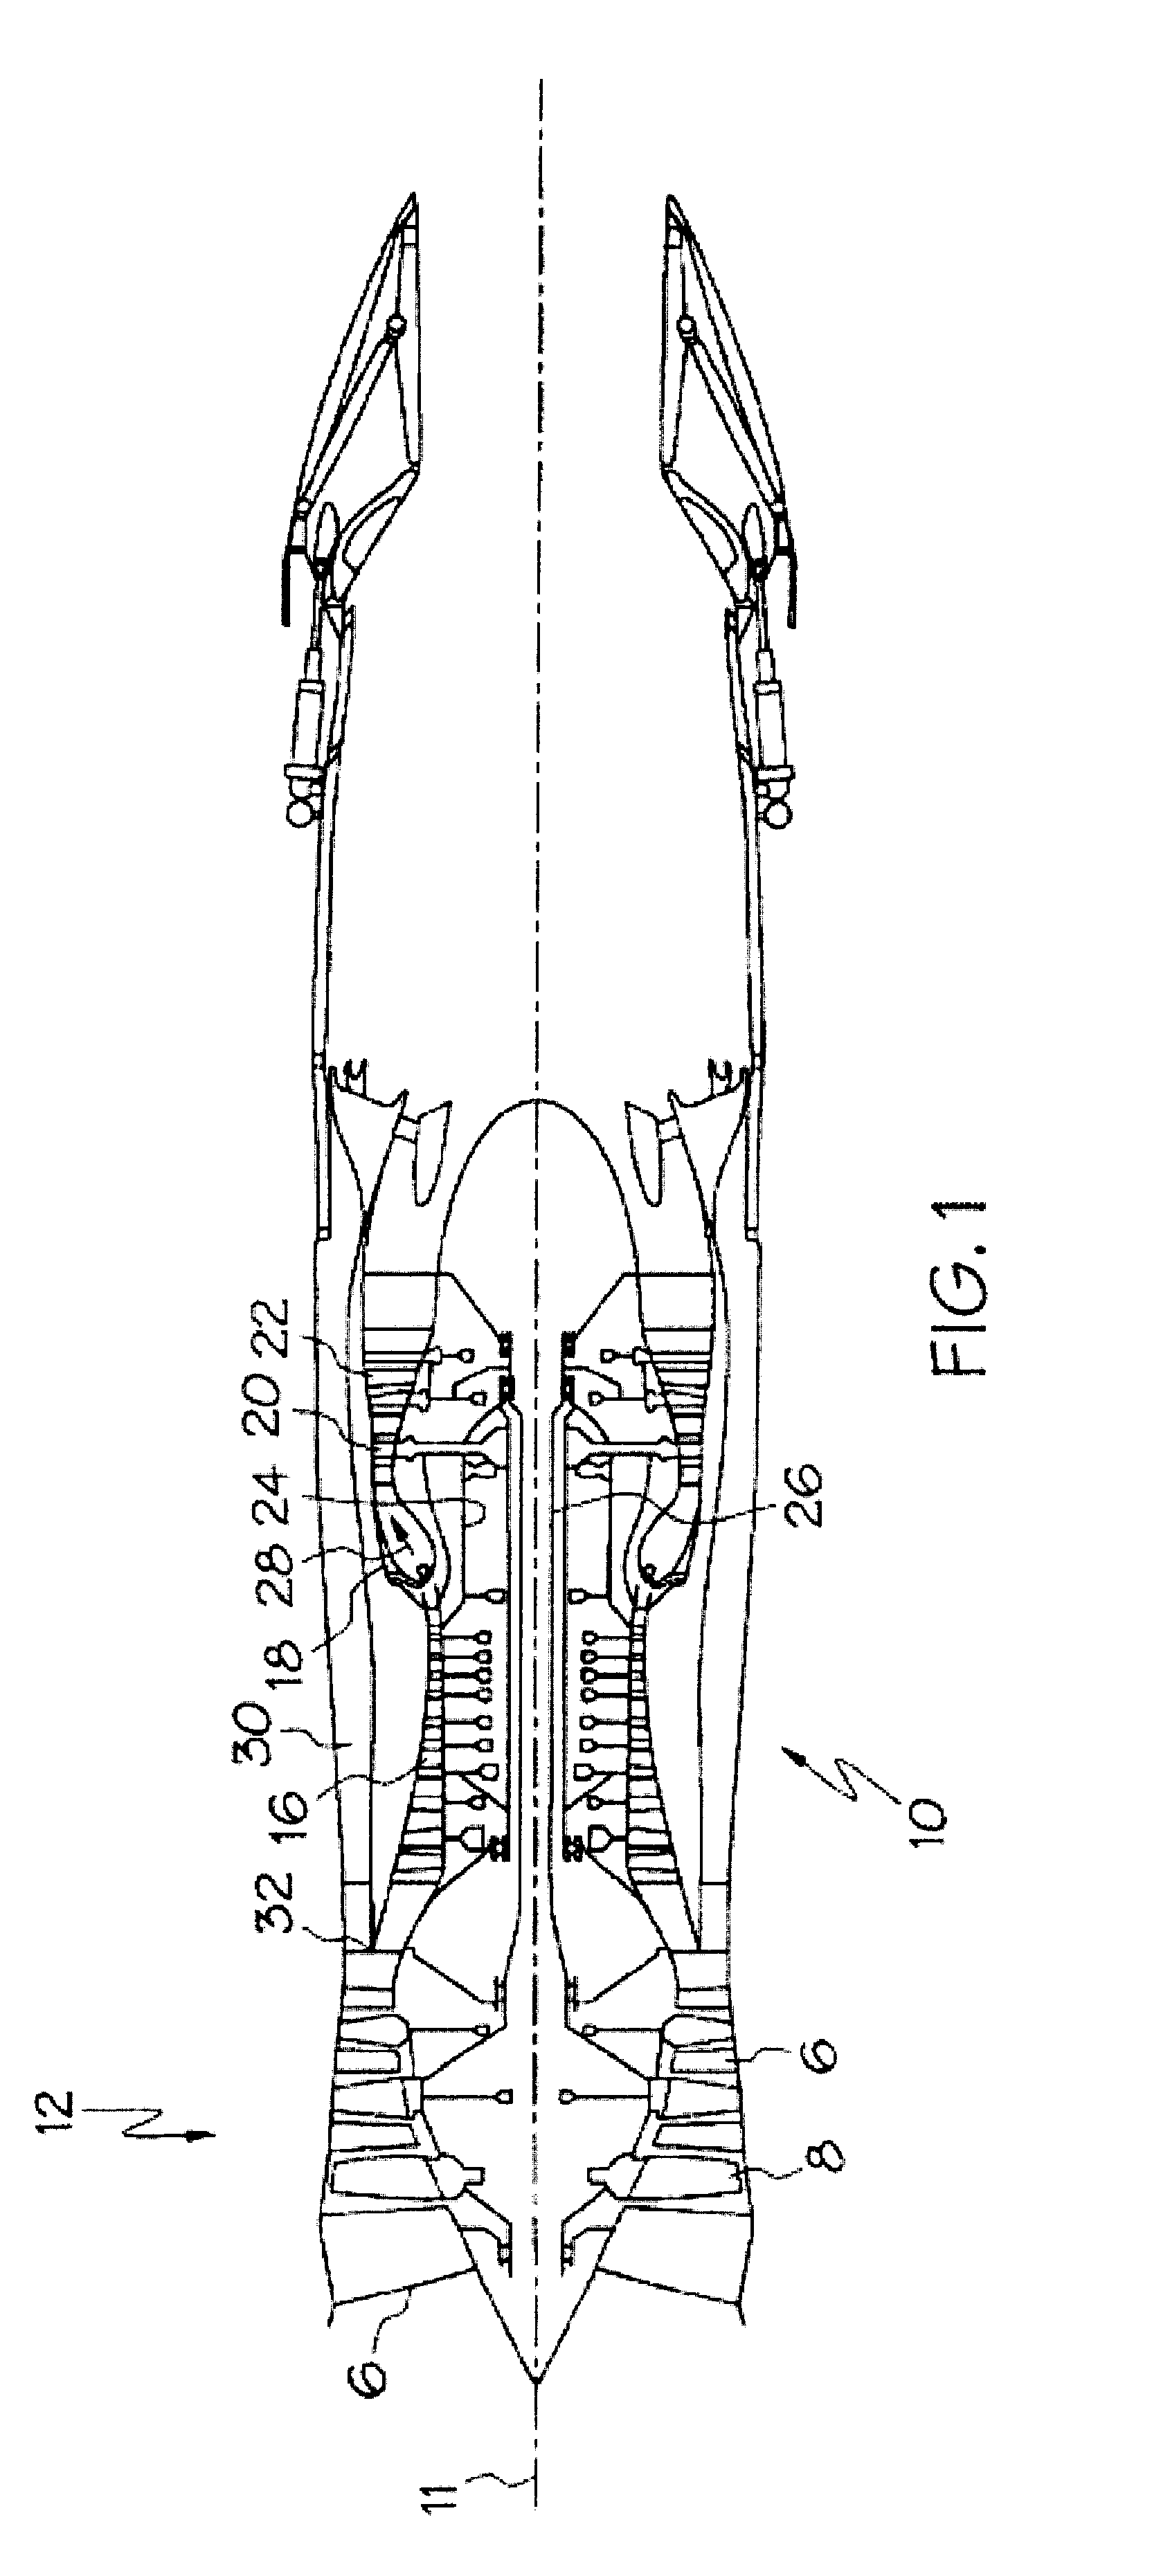 Systems and methods for automated sensing and machining for repairing airfoils of blades